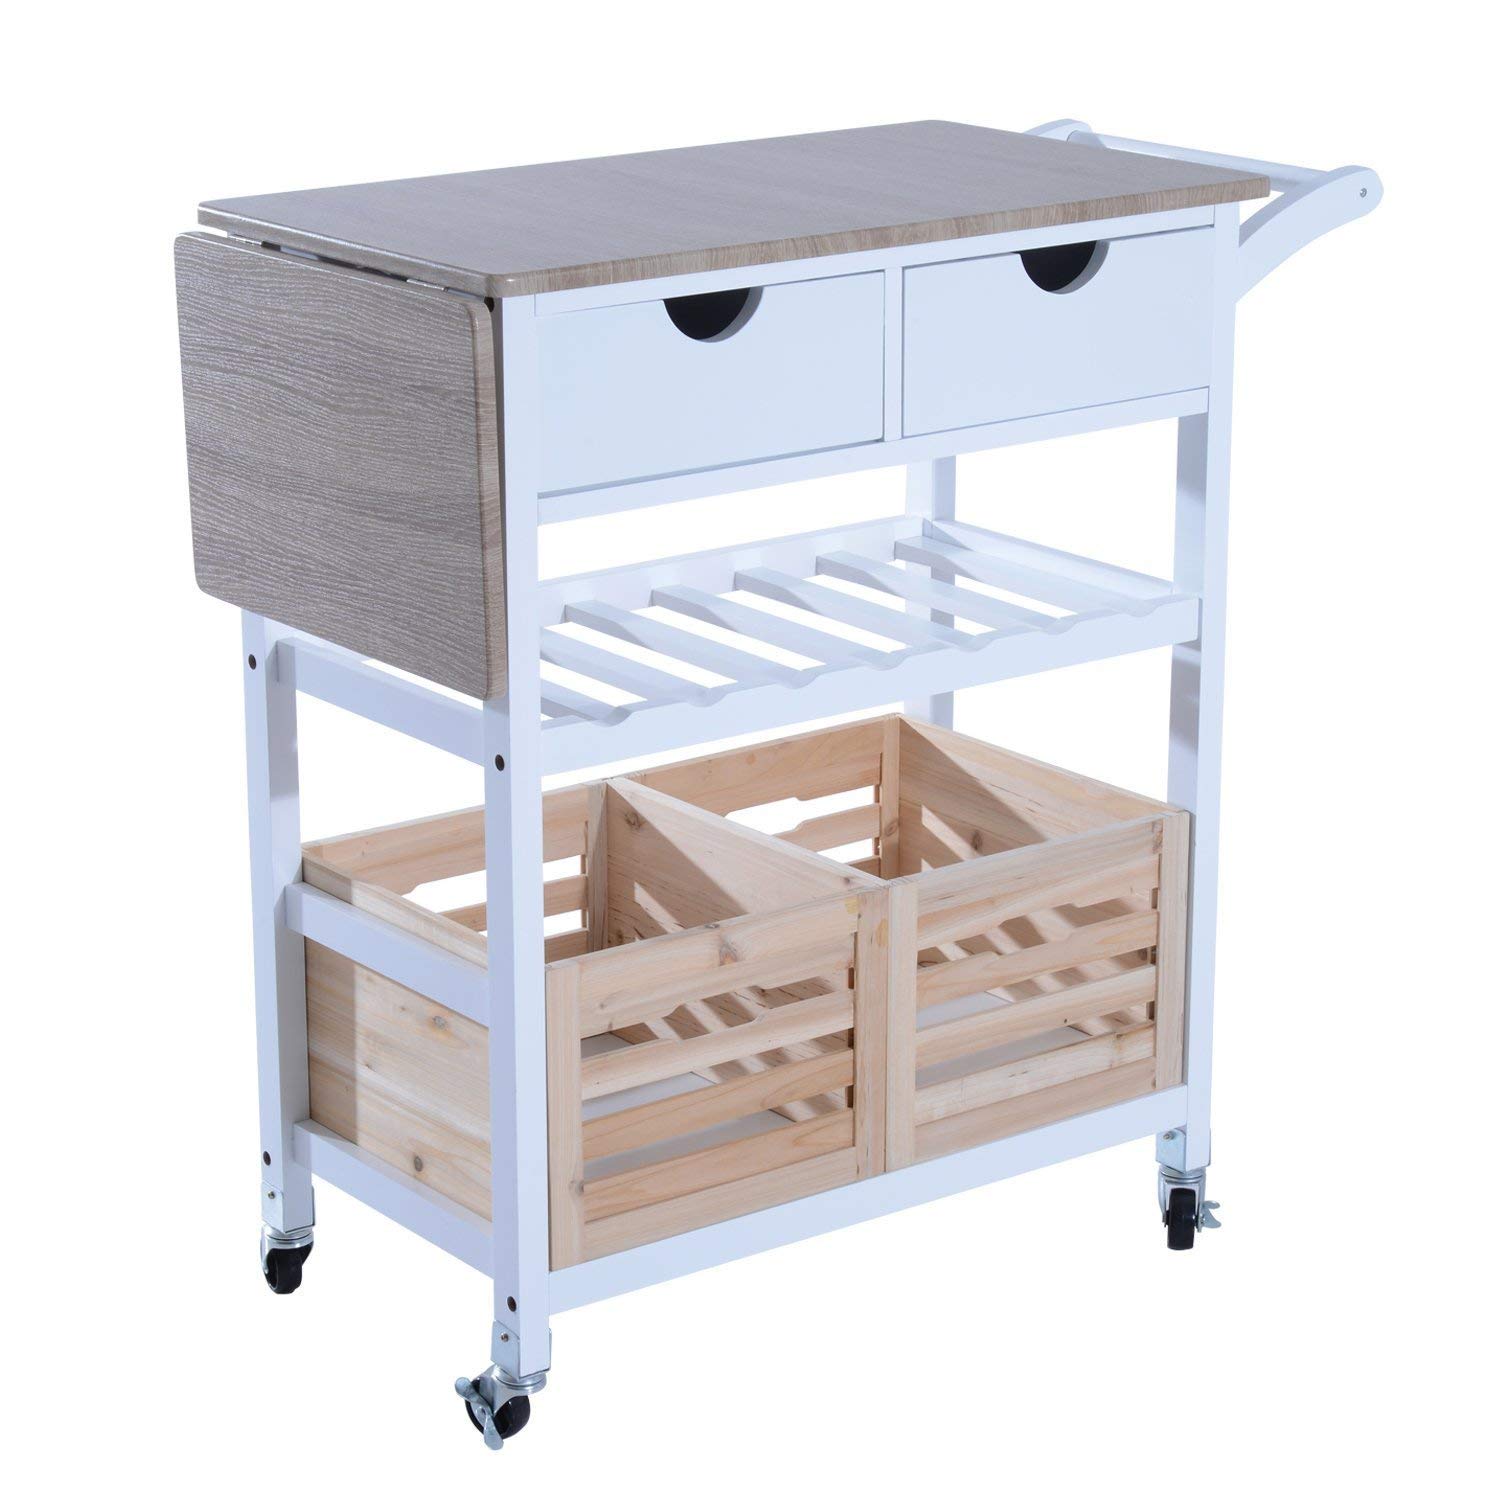 Proper Price Kitchen Wooden Tea Trolley With Wheels And Baskets